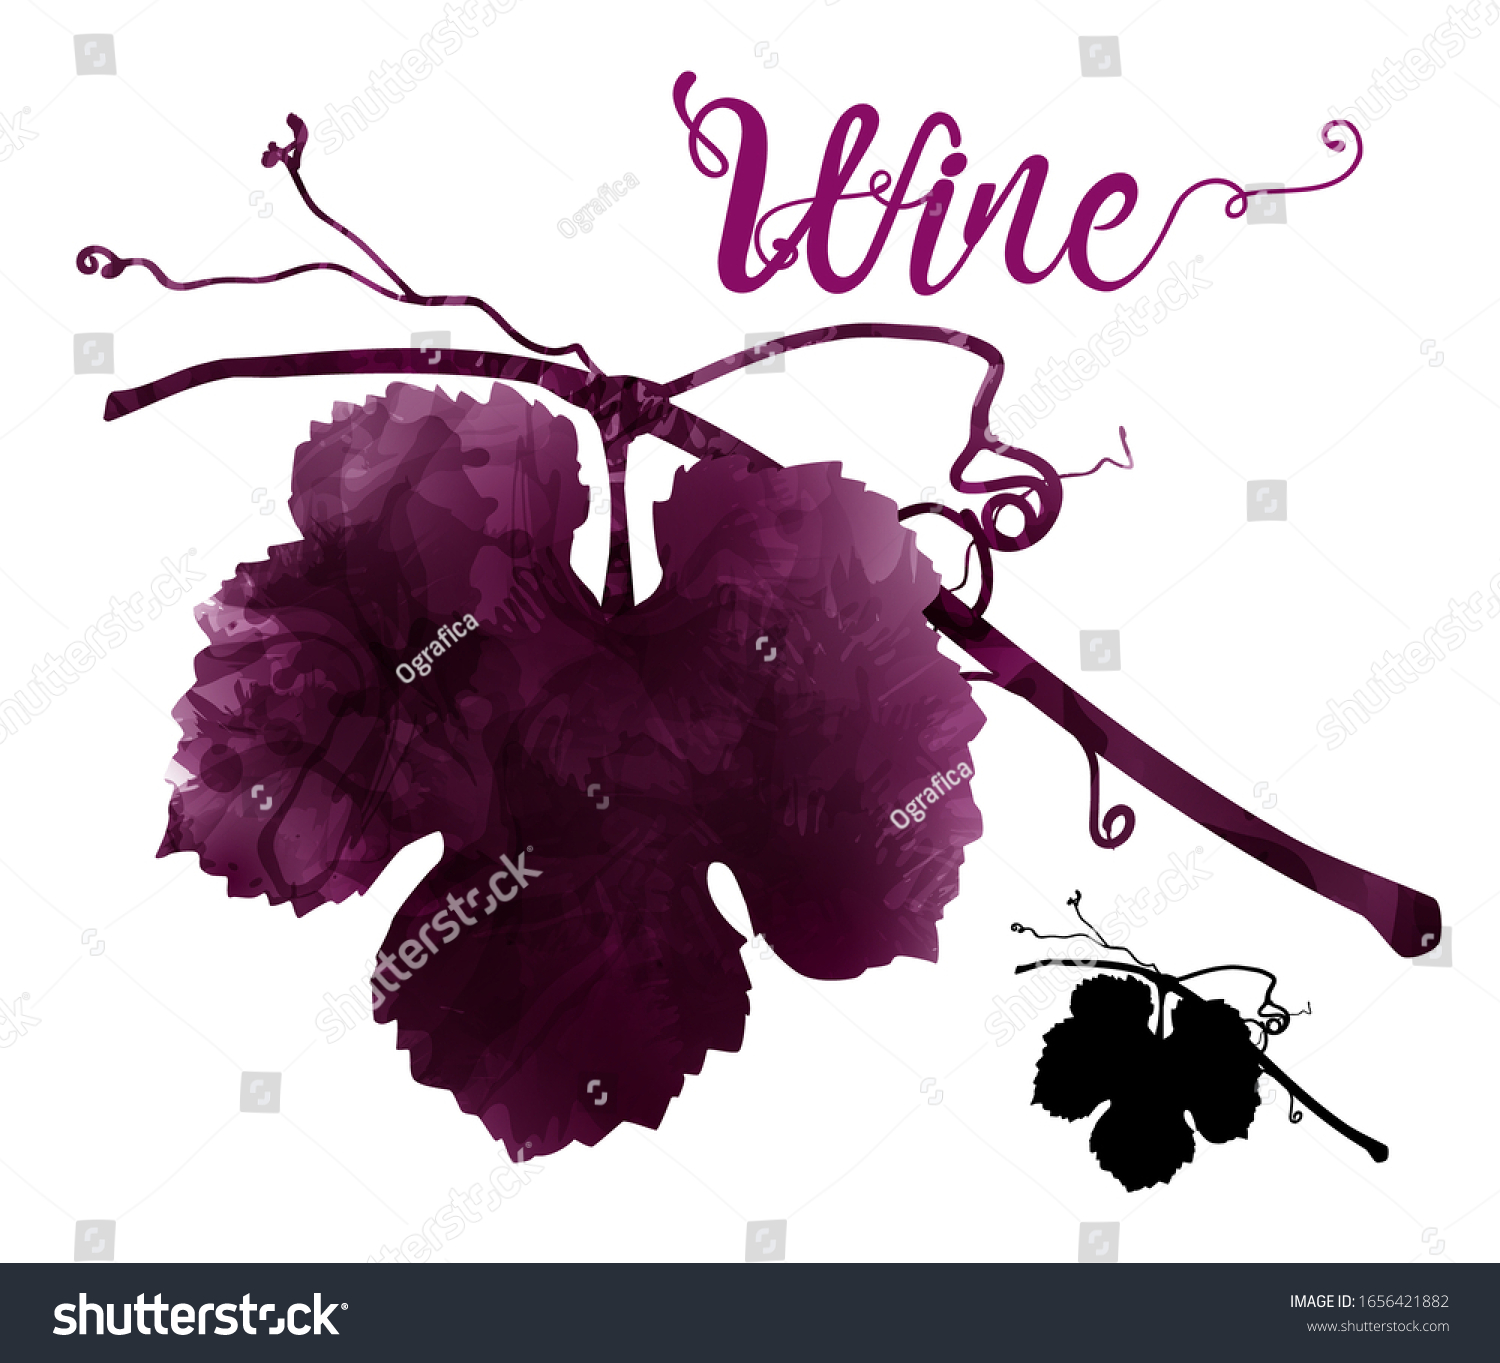 illustration of vine with tendrils. Artistic illustration with red wine stains. Poster, cover, advertisement, flyer, presentation, invitation for wine events. Silhouette. Vector drawing #1656421882